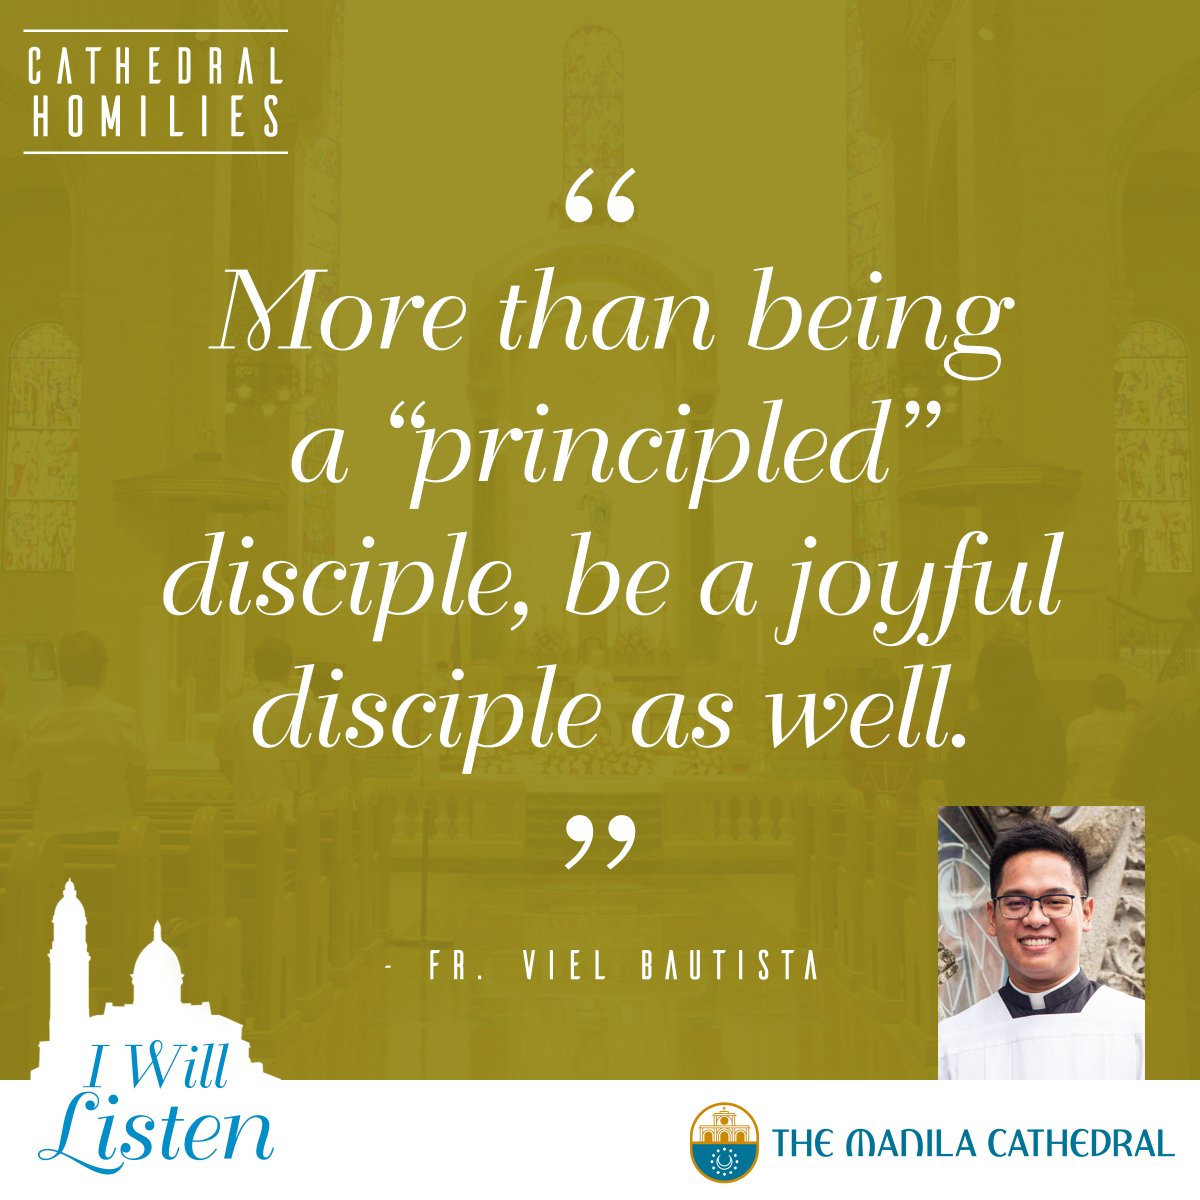 I WILL LISTEN | CATHEDRAL HOMILIES
“More than being a “principled” disciple, be a joyful disciple as well.” - Fr. Viel Bautista

May 02, 2024
Memorial of Saint Athanasius, Bishop and Doctor of the Church

Watch the full homily here: youtu.be/Xi9NtdBNivQ